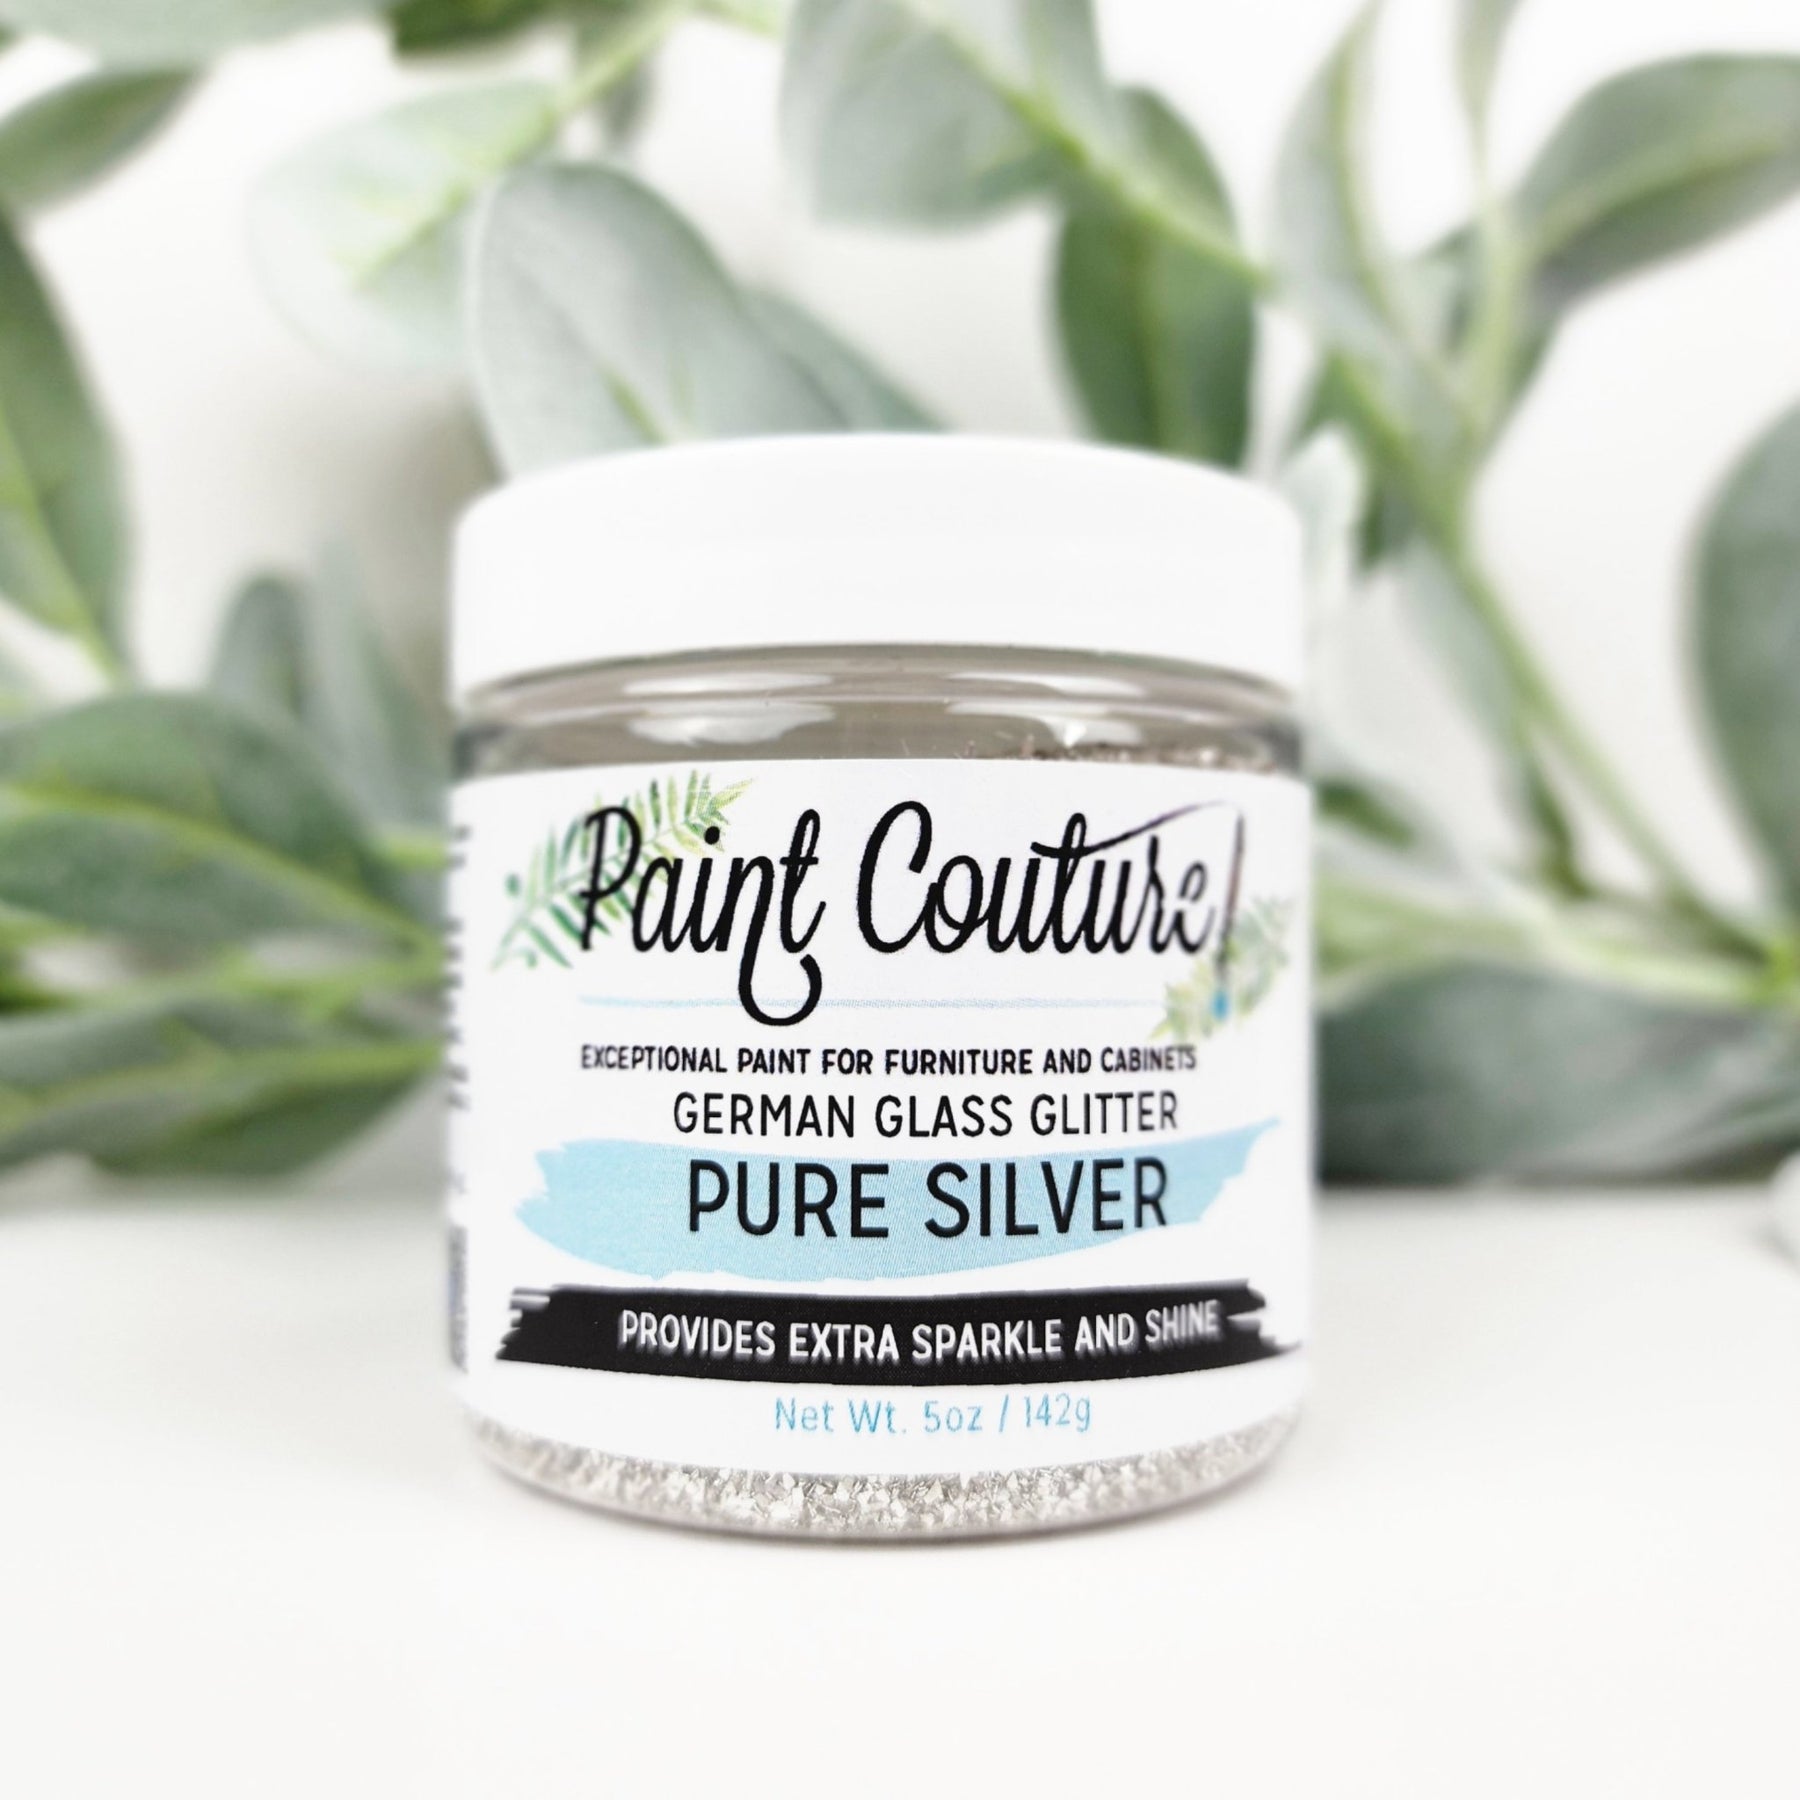 Copper German Glass Glitter by Paint Couture – All Paint Products